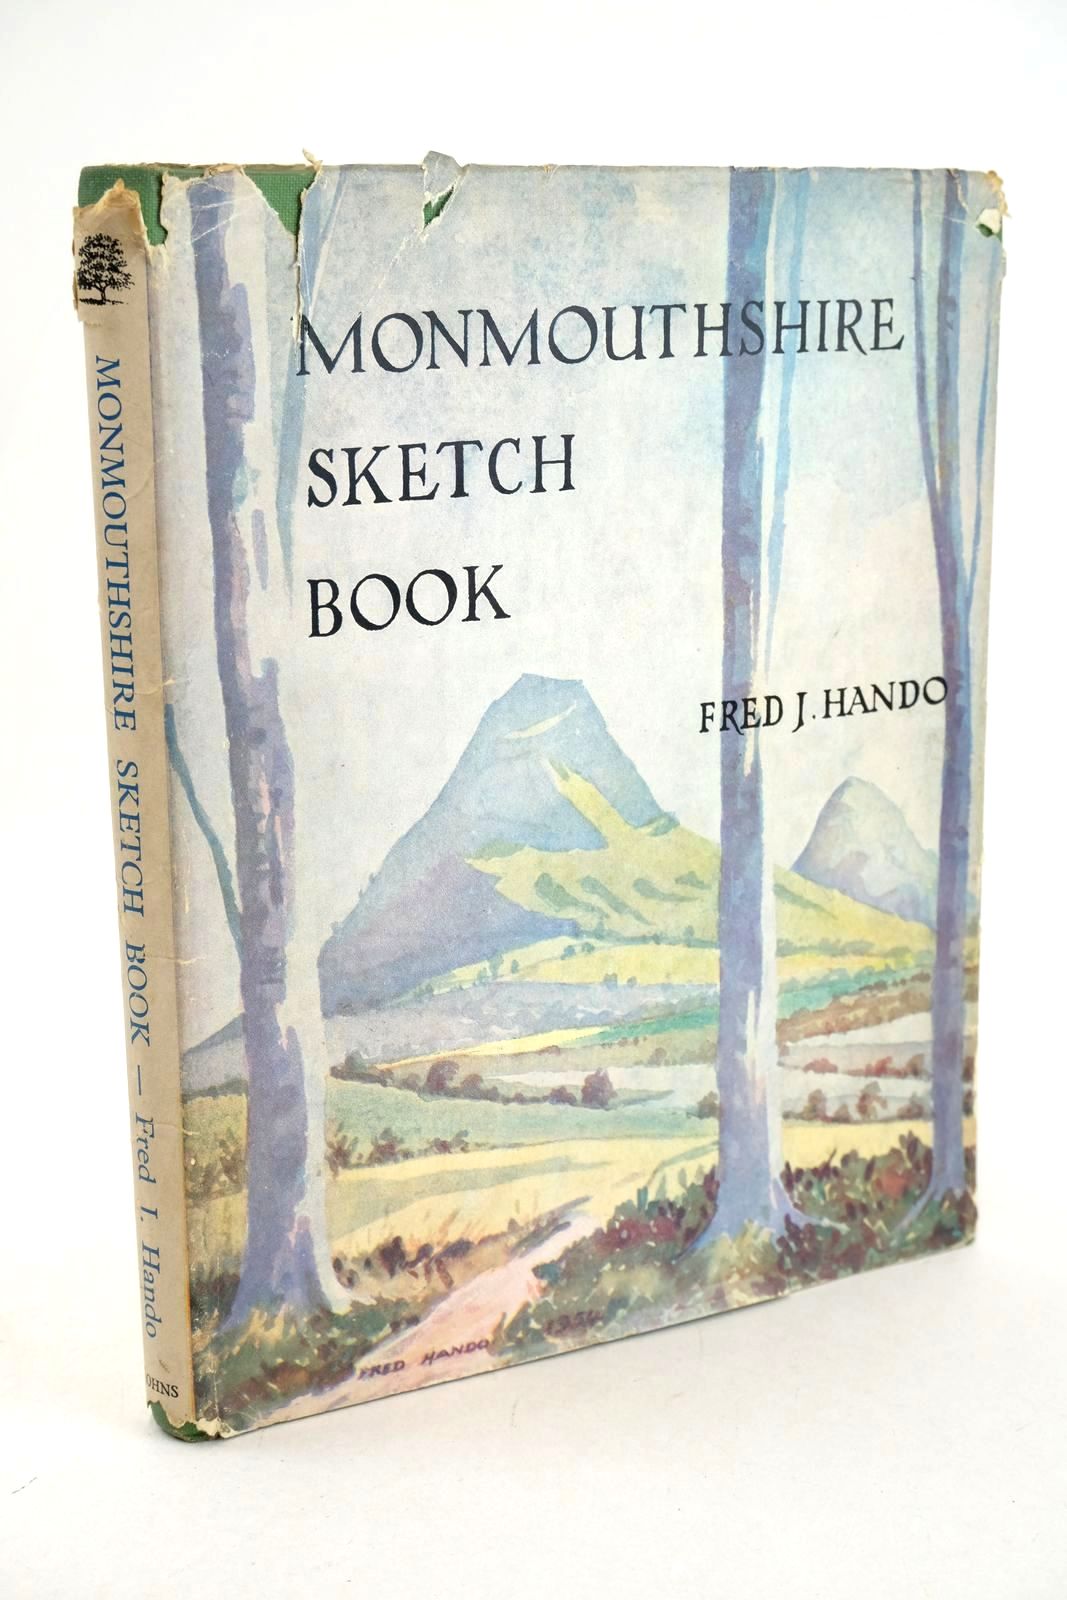 Monmouthshire Sketch Book